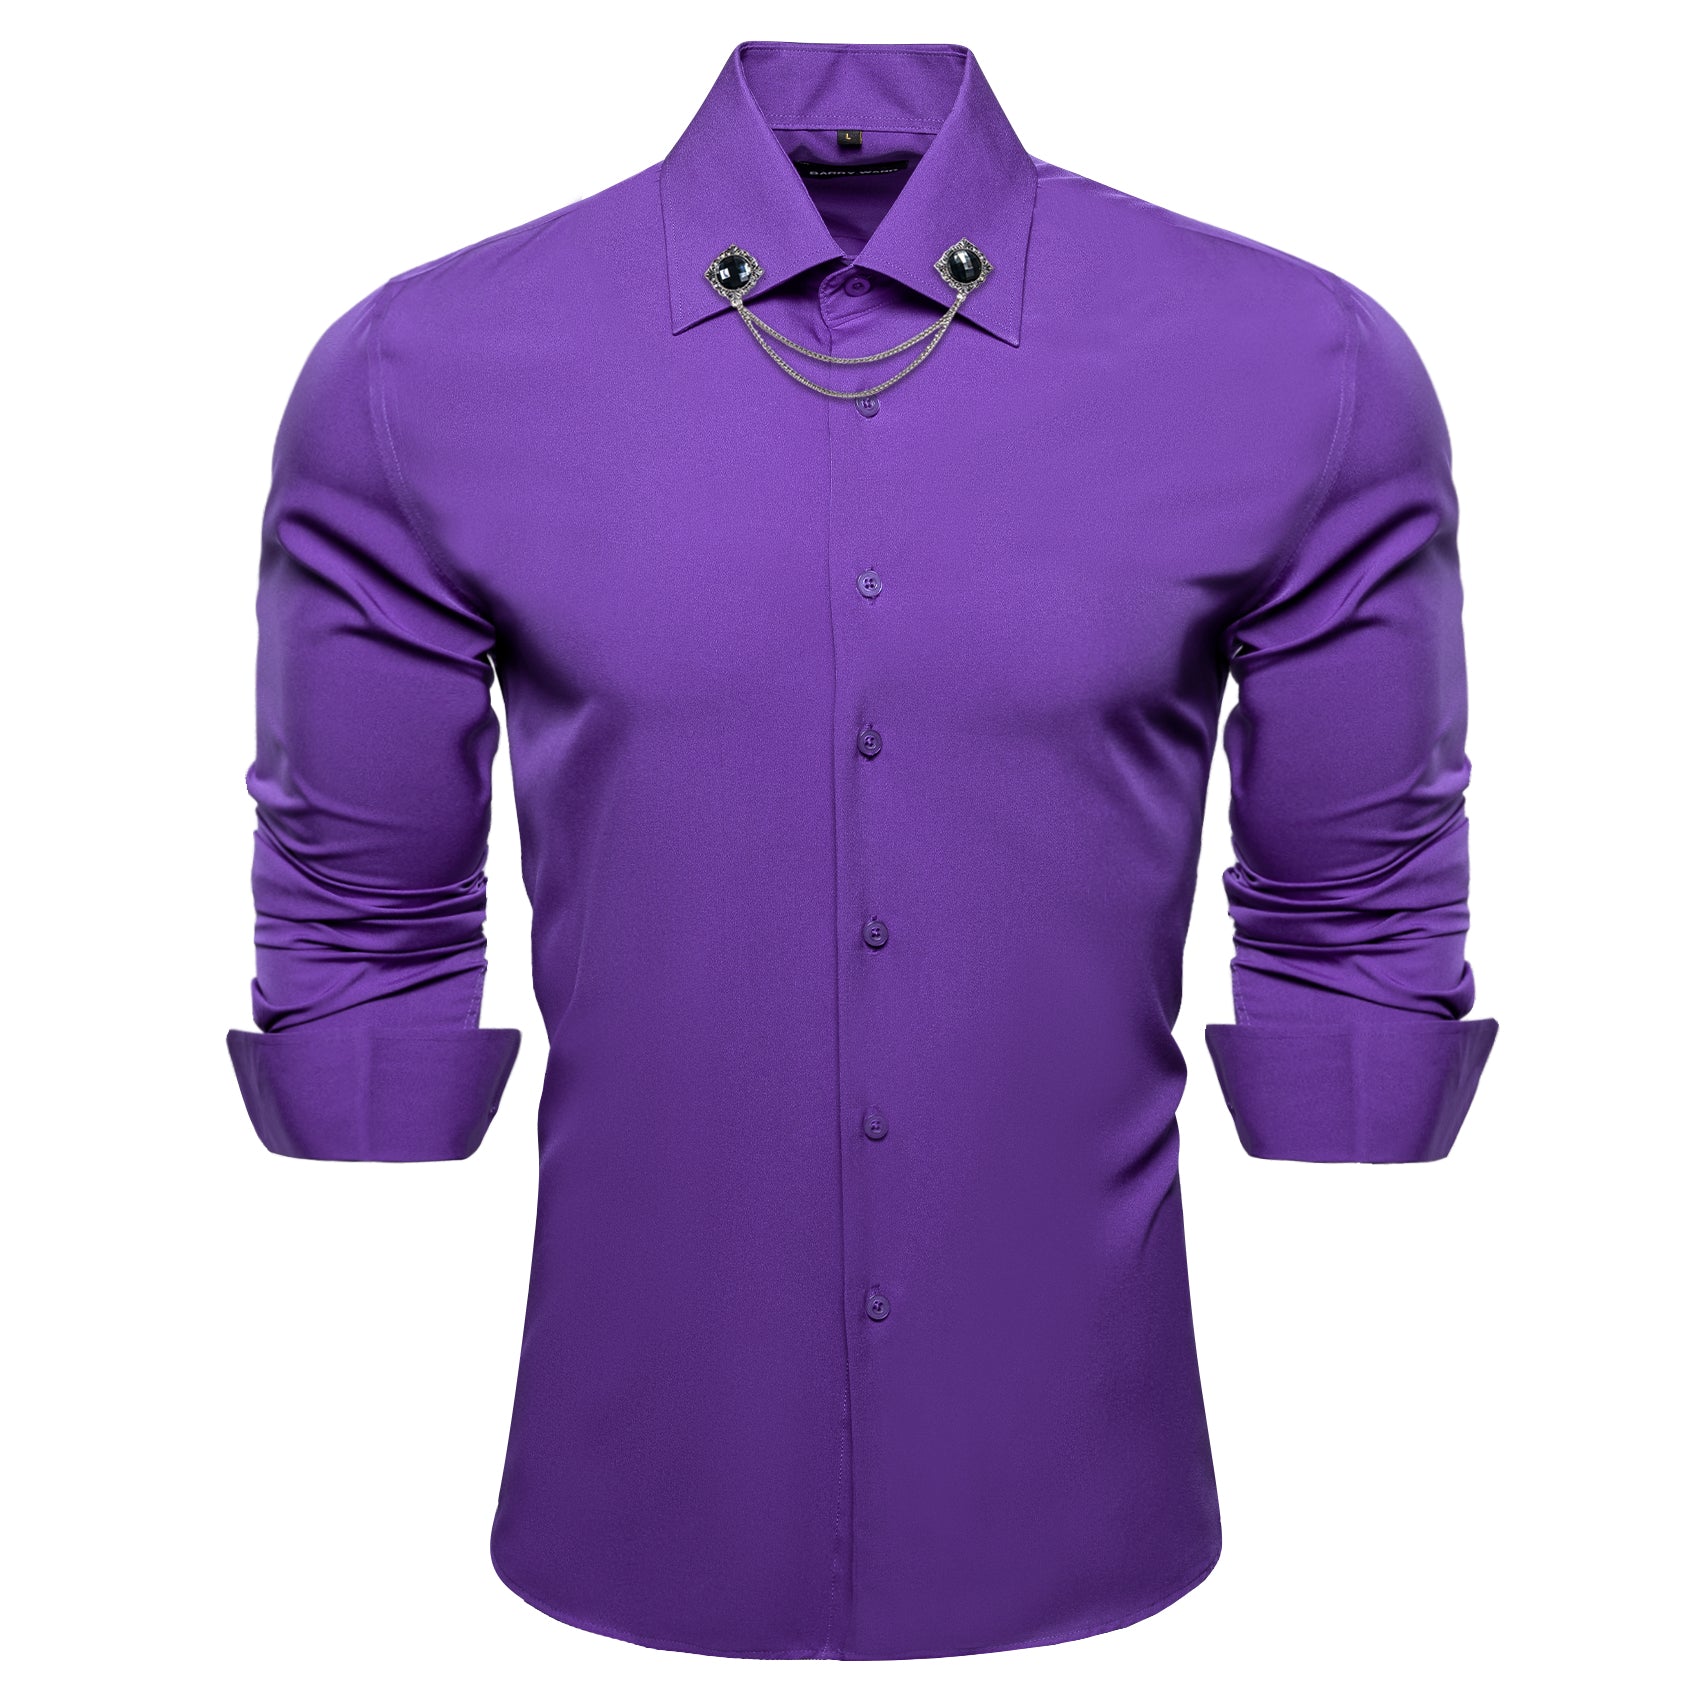 Barry.wang Blueviolet Solid Silk Shirt with Collar Pin